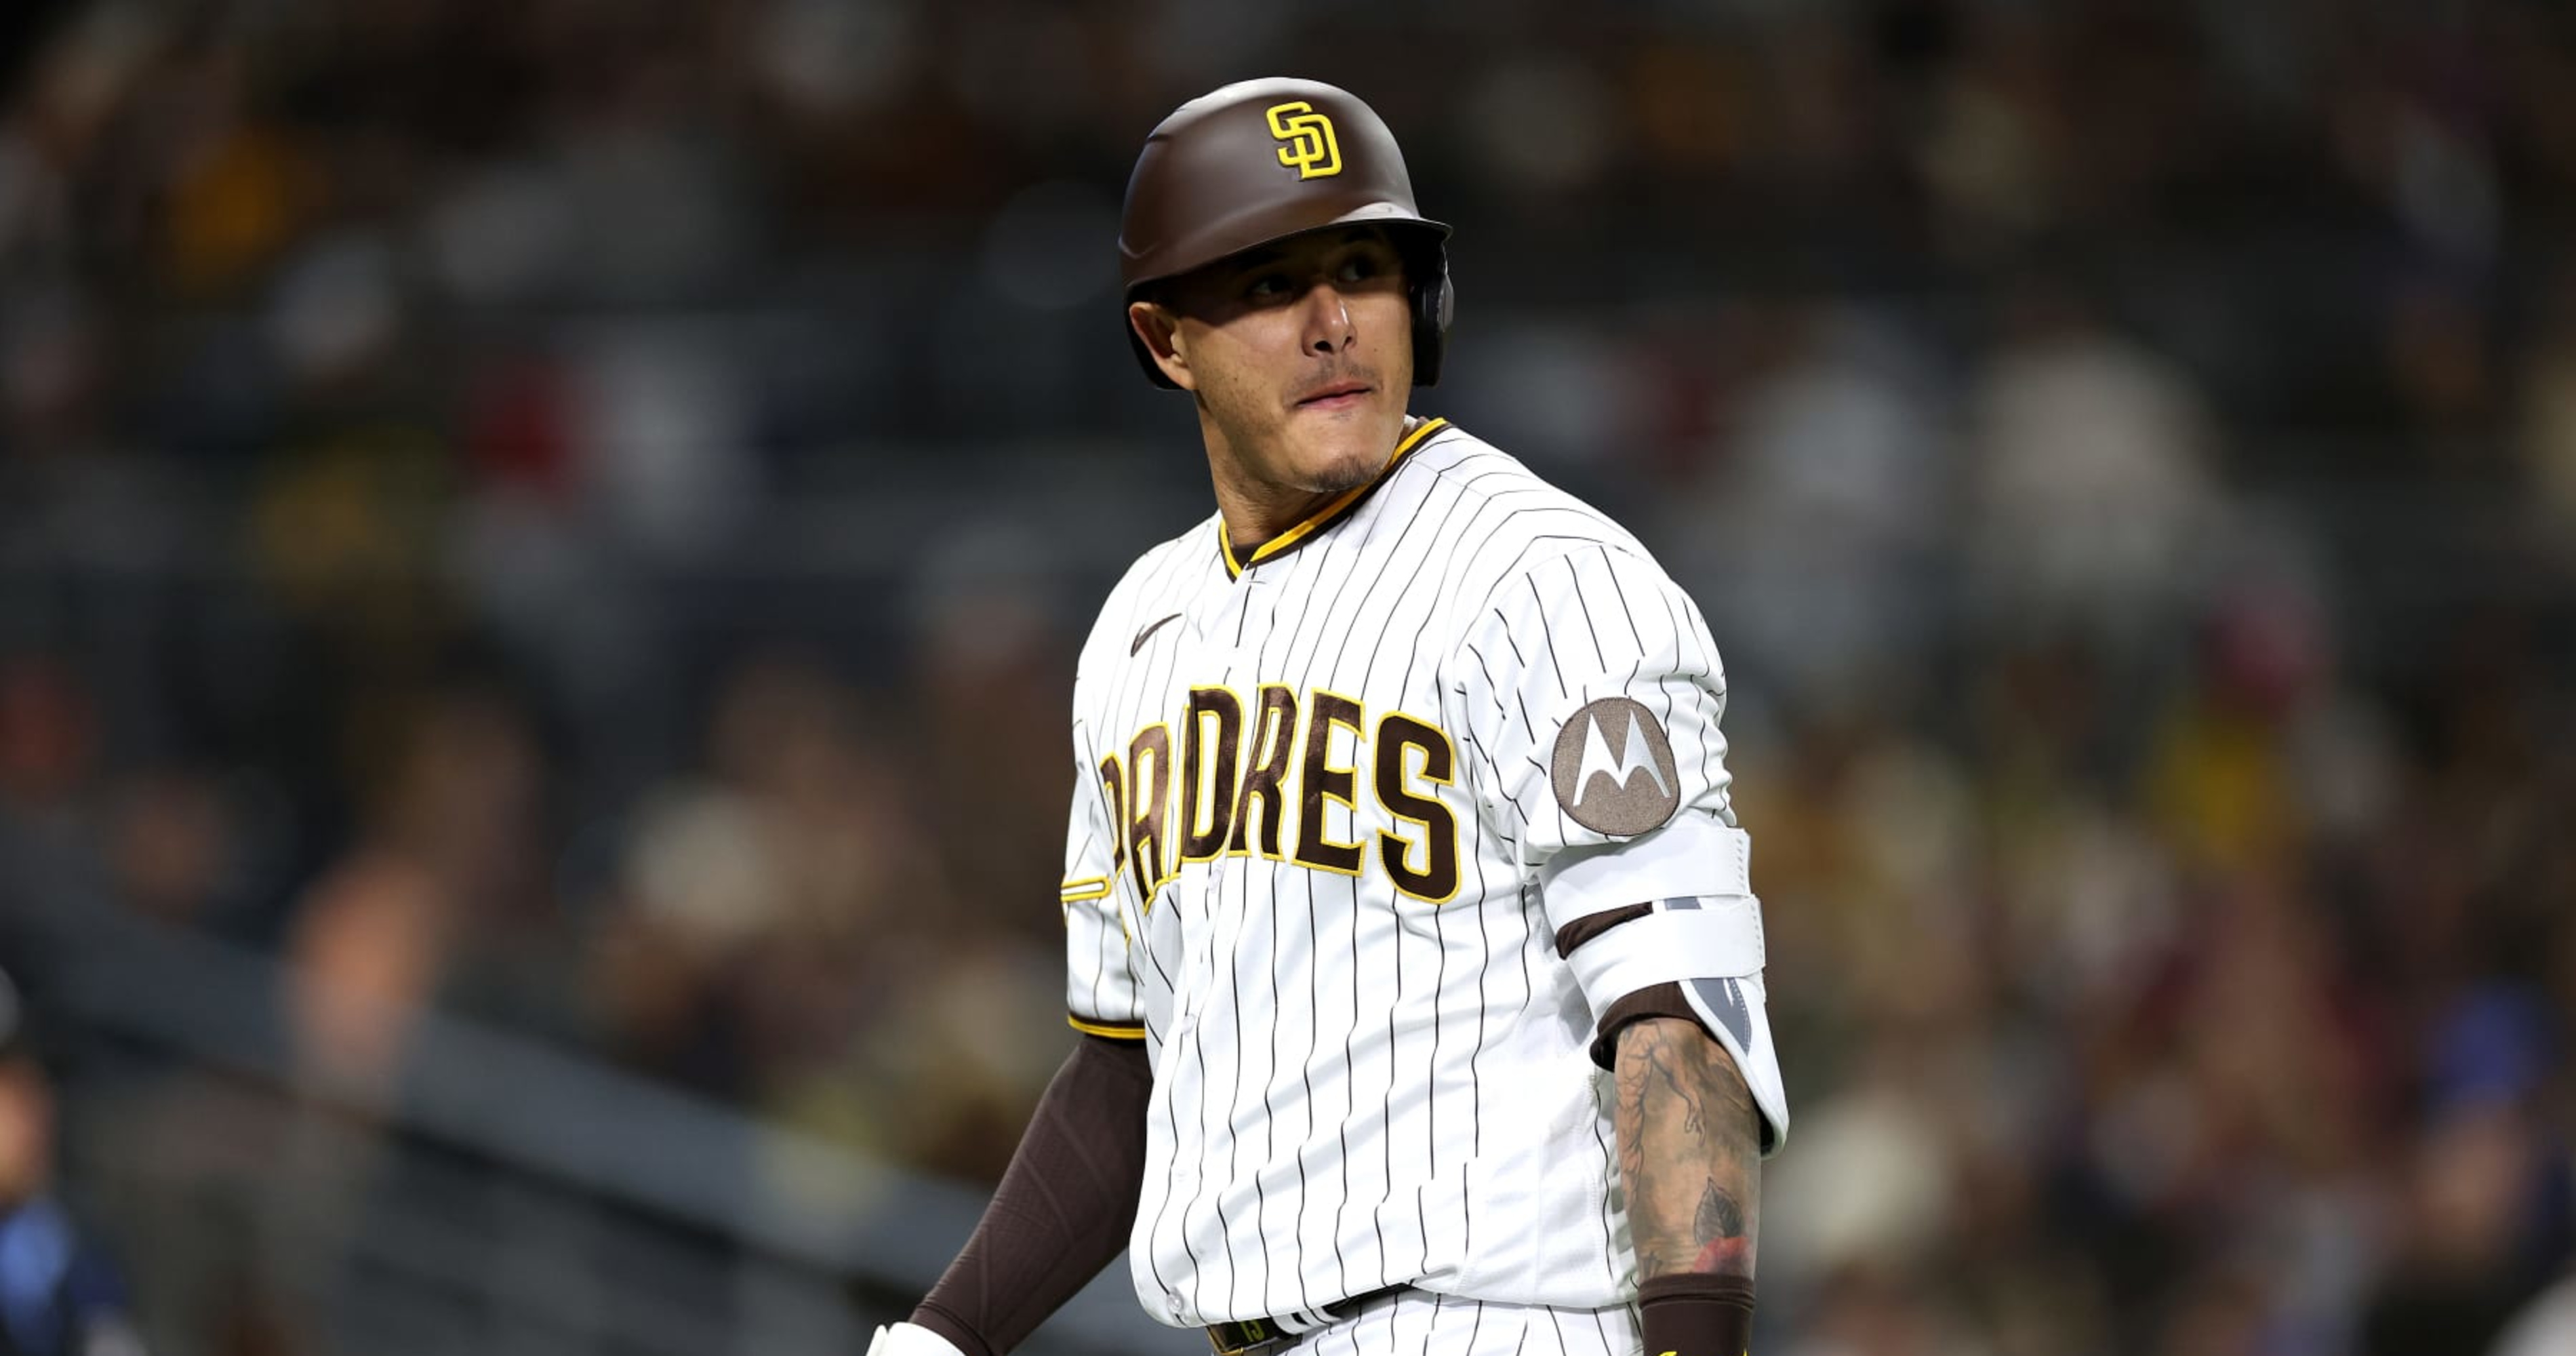 New Padres Uniforms 2020 Germany, SAVE 46% 